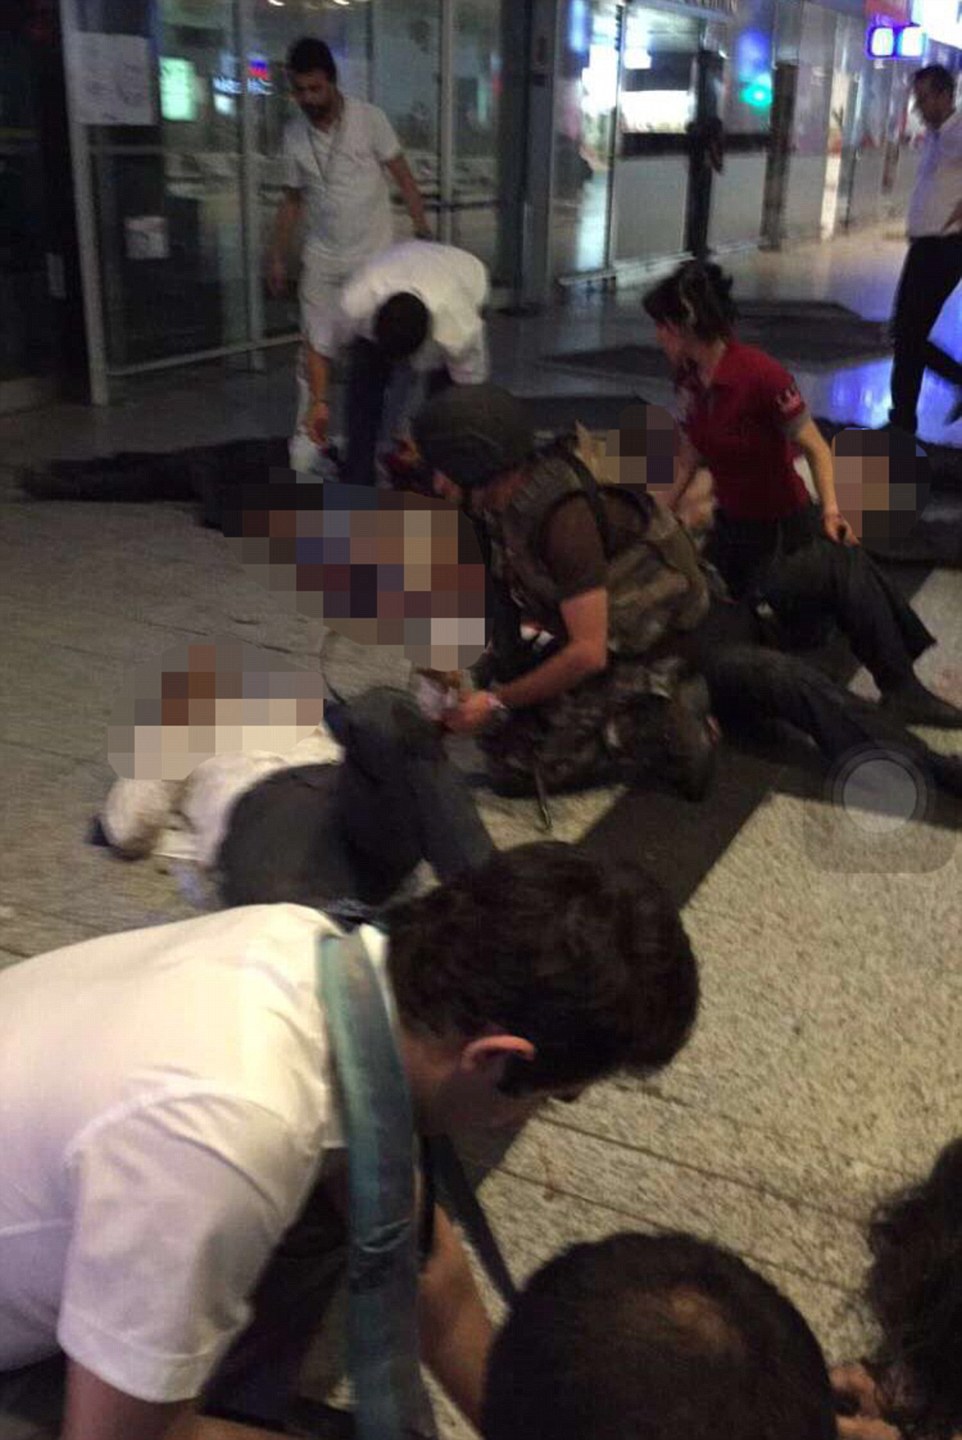 Paramedics and special forces officers at the scene help the more than 140 wounded at the airport, with Turkish officials saying the death toll will rise to 50